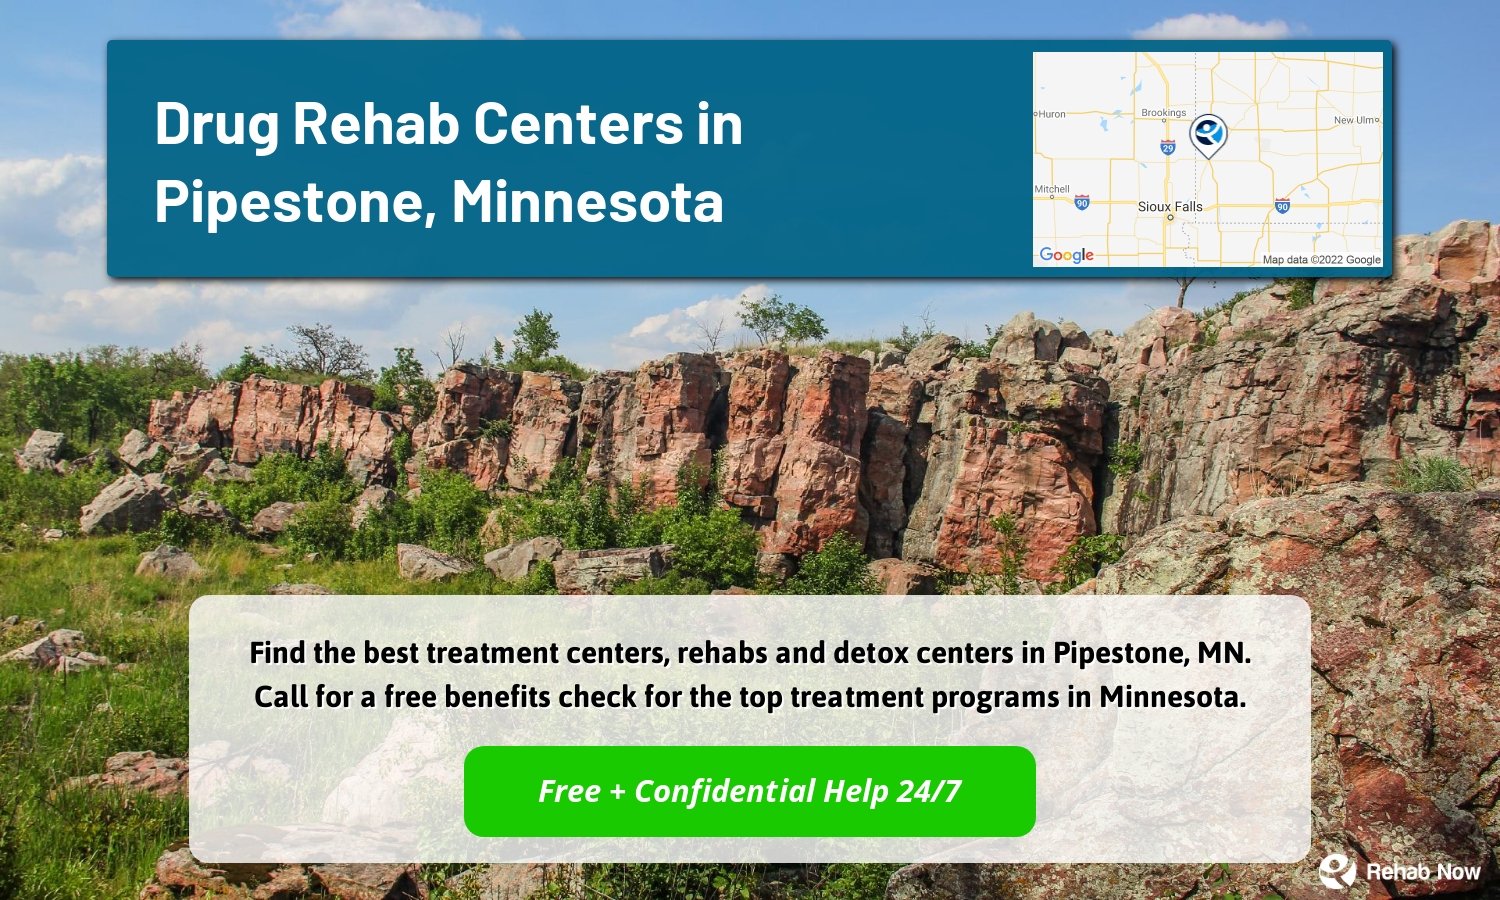 Find the best treatment centers, rehabs and detox centers in Pipestone, MN. Call for a free benefits check for the top treatment programs in Minnesota.